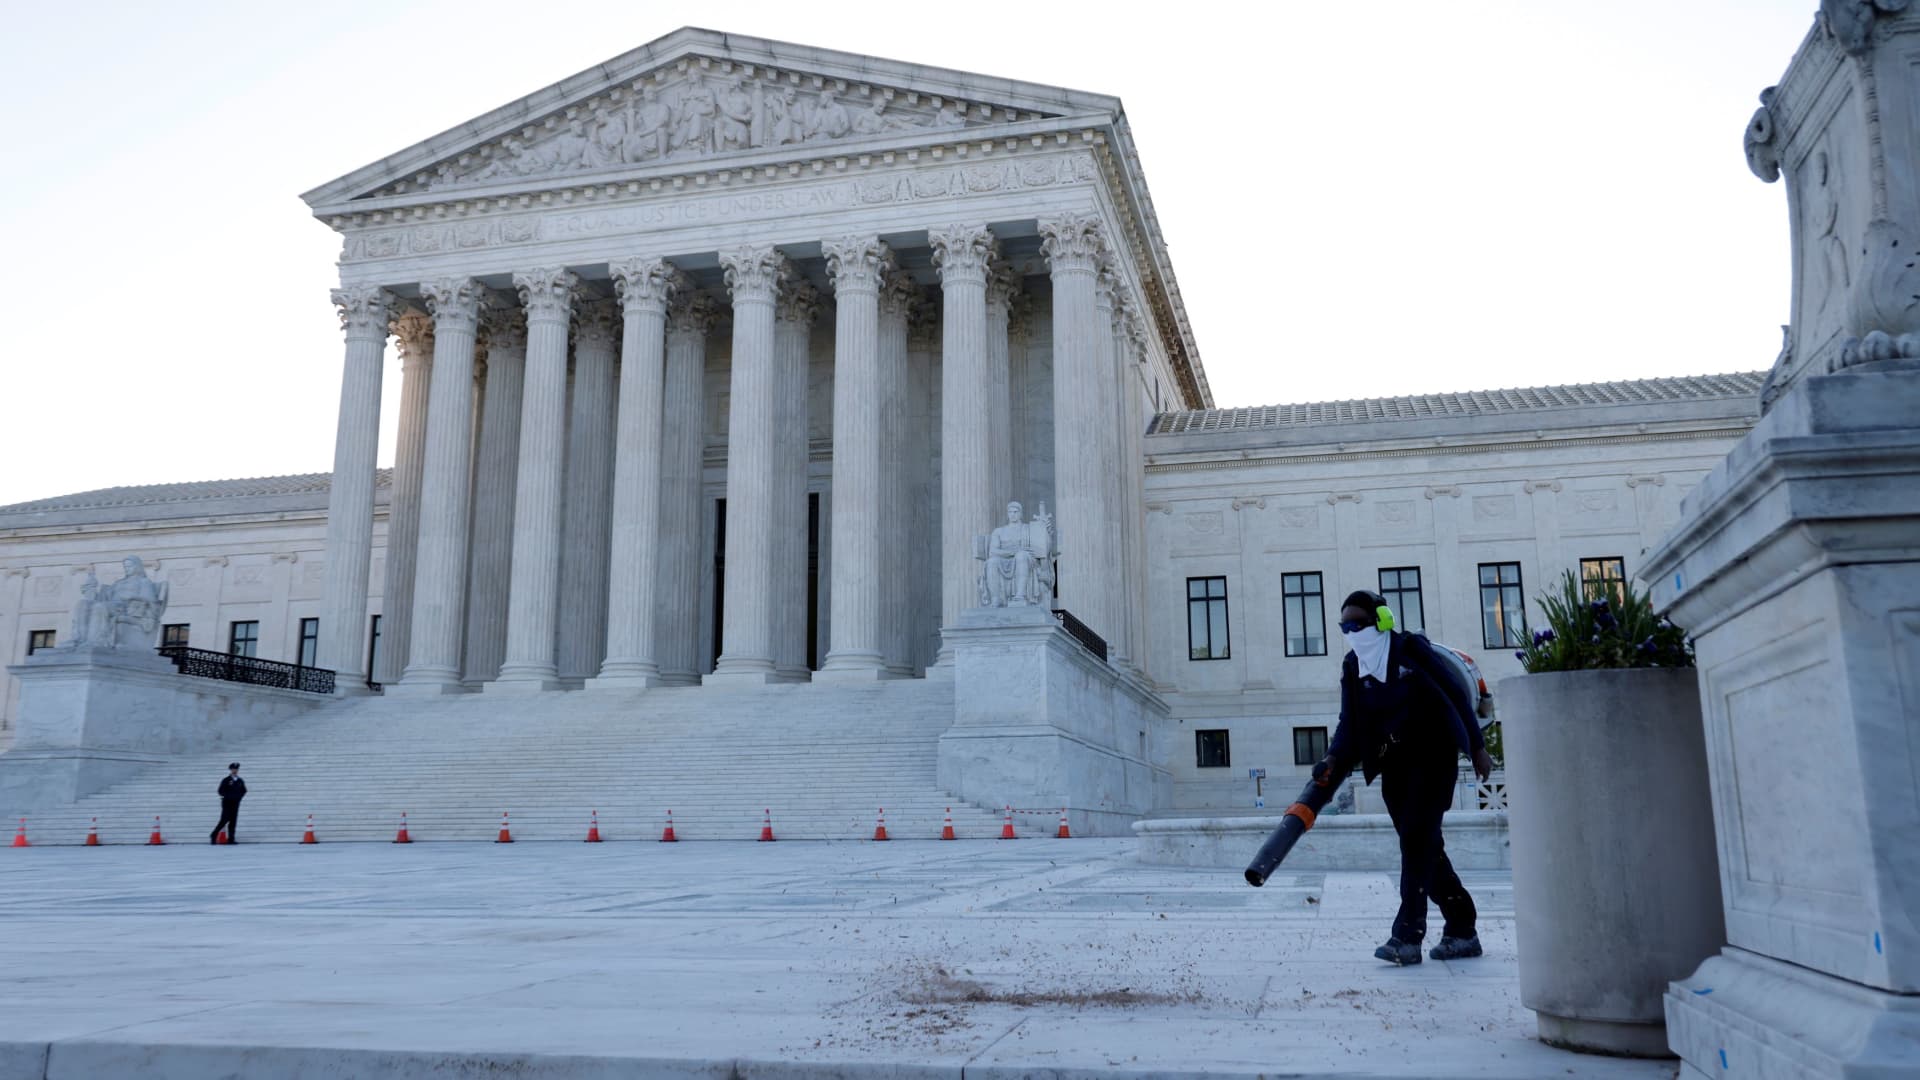 A worker clears front steps as morning rises over the U.S. Supreme Court building, still closed to the public during the coronavirus disease (COVID-19) outbreak in Washington, April 26, 2021.